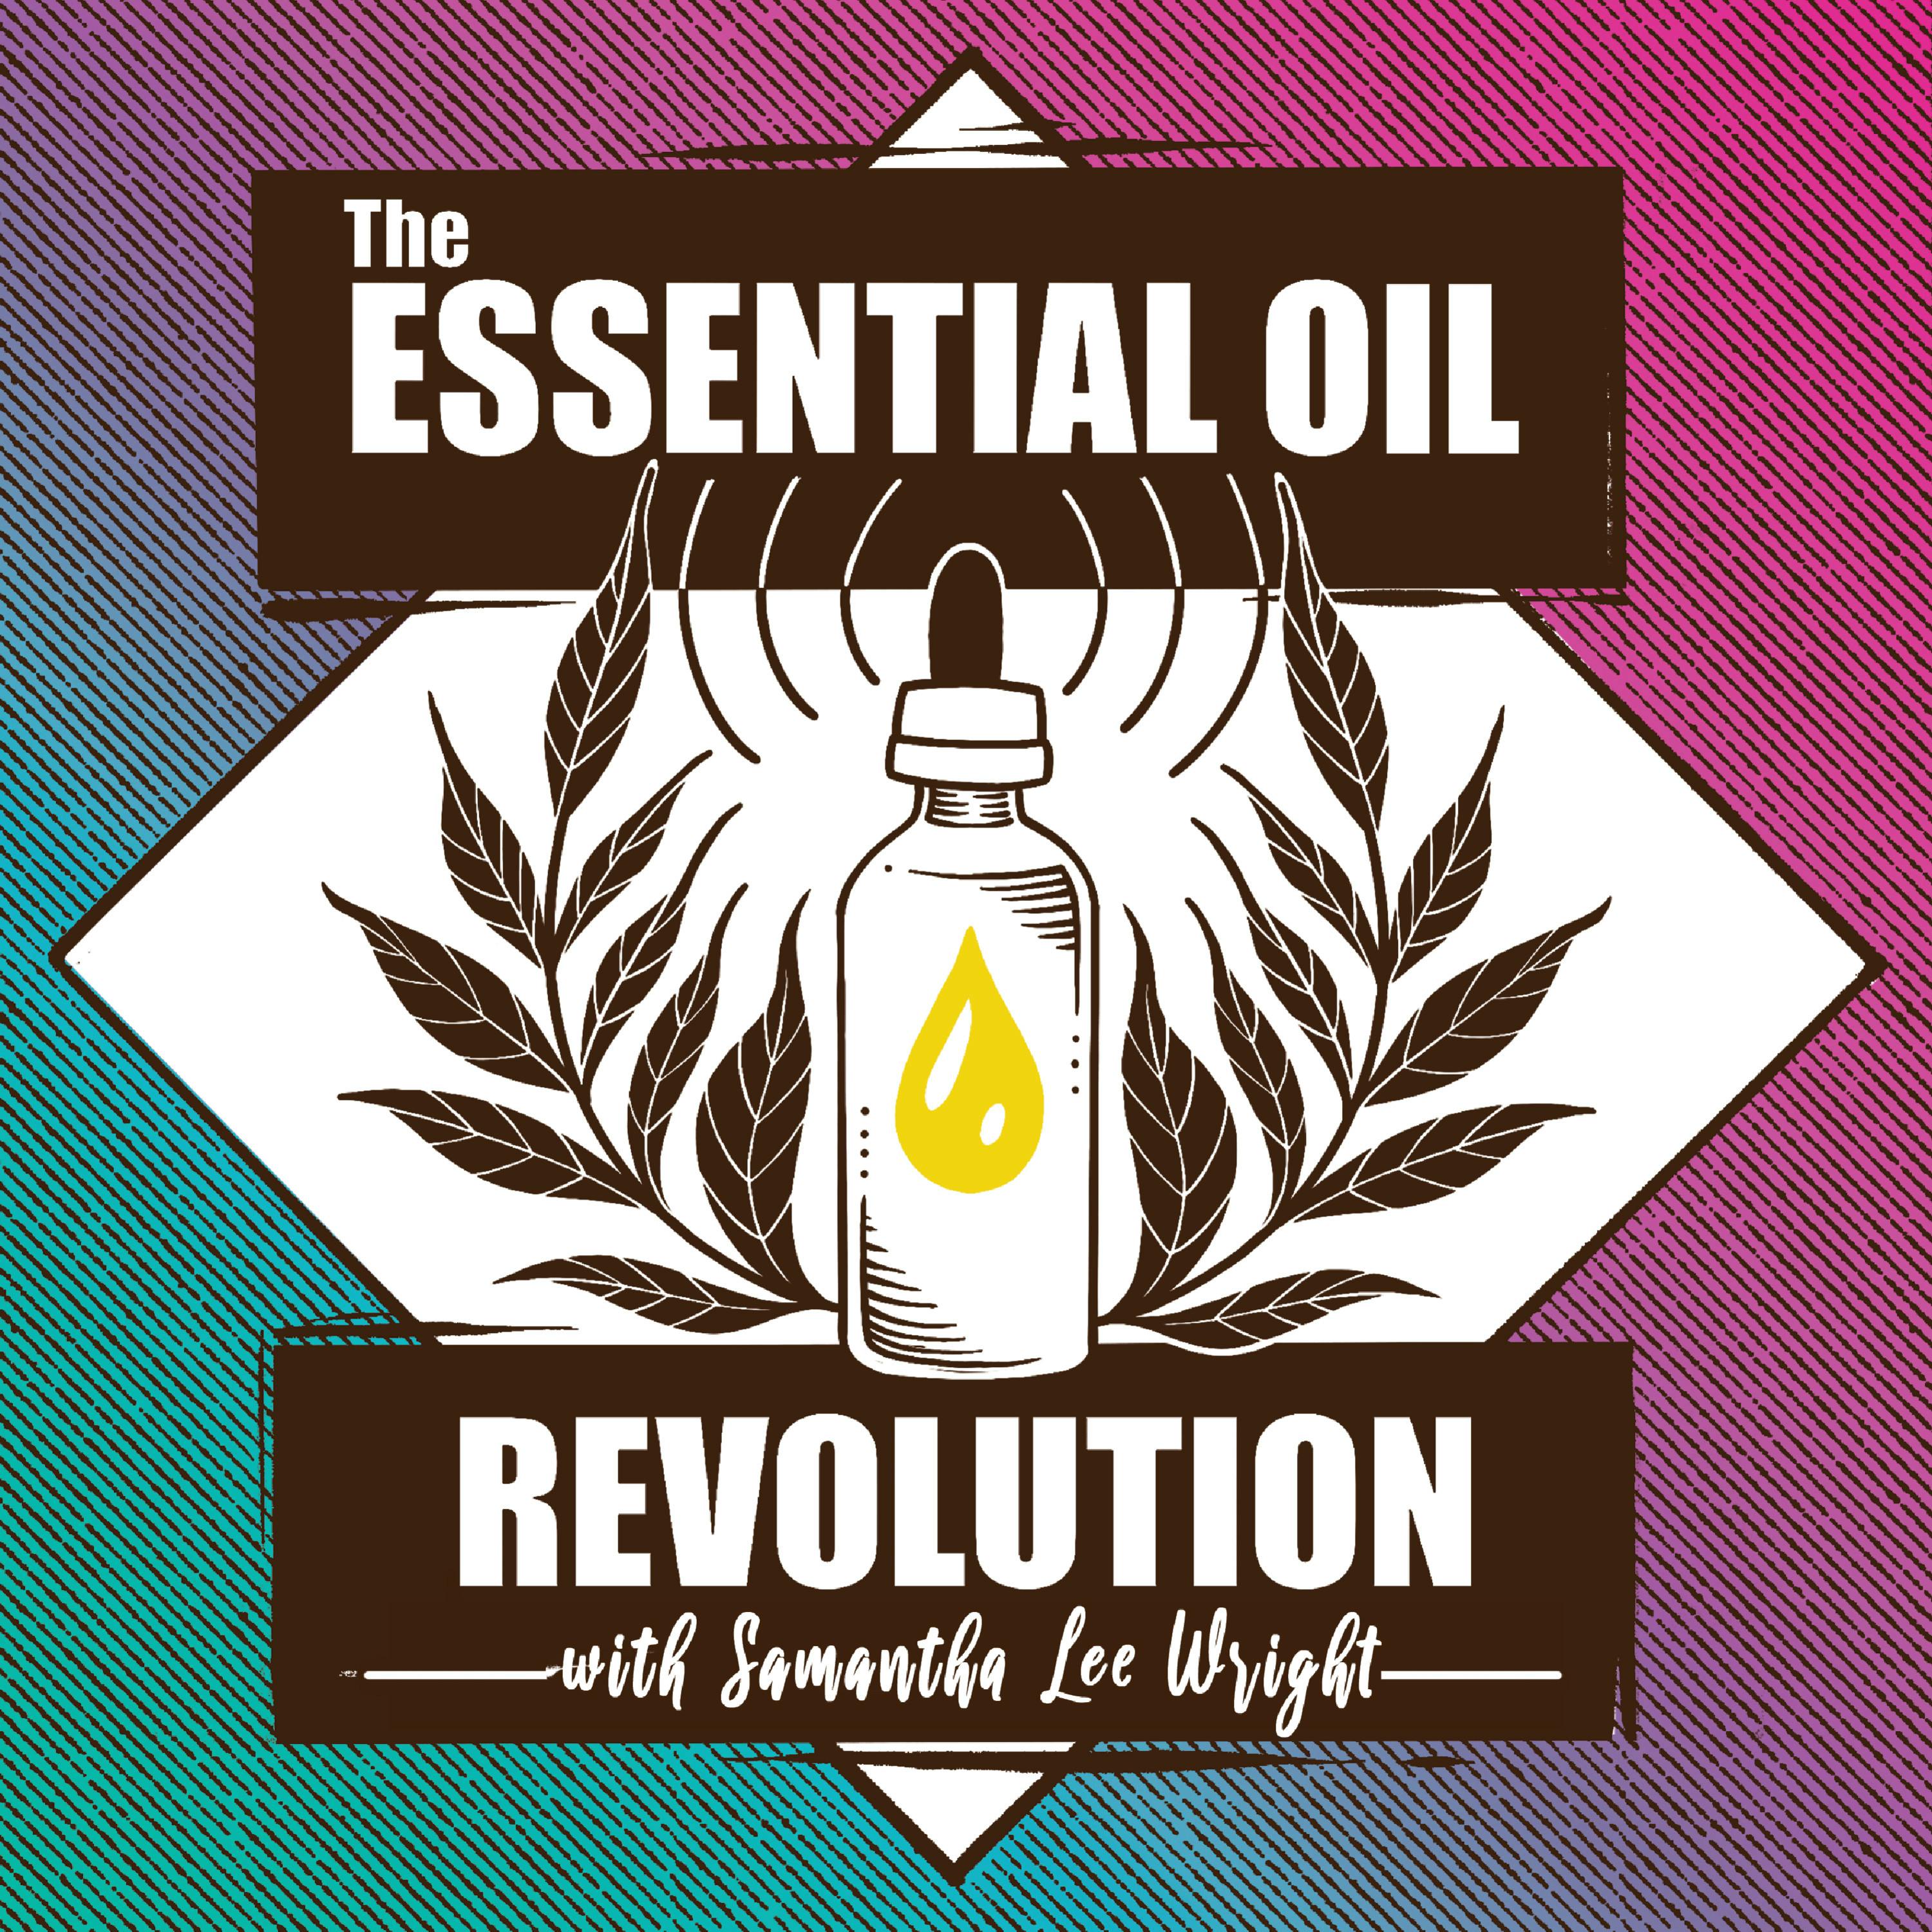 336: Using Essential Oils for Defense, Openness, and Evolution w/ Josephine Spilka